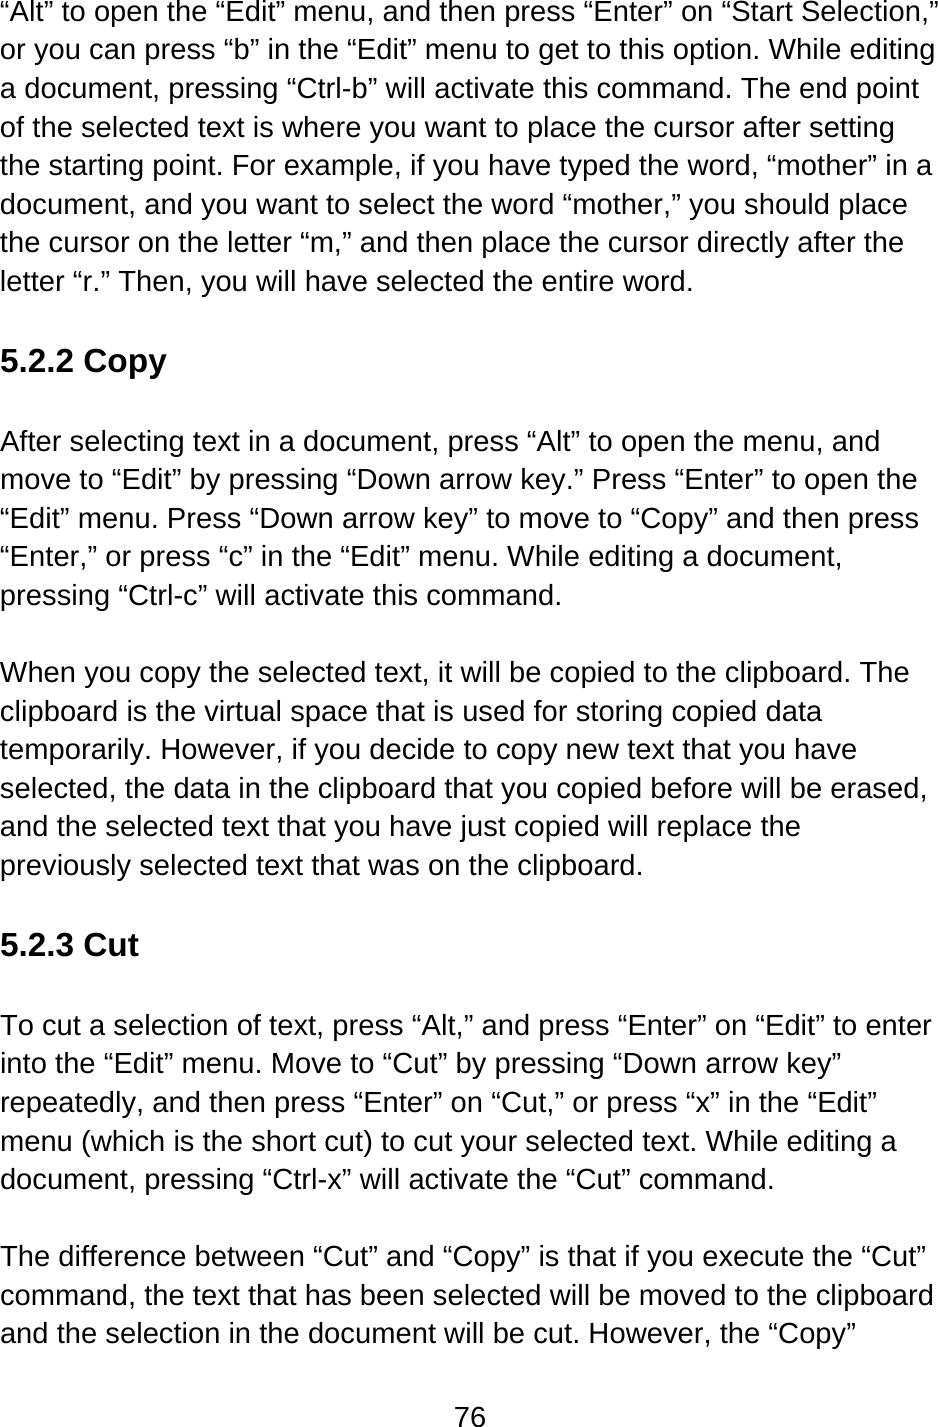 76  “Alt” to open the “Edit” menu, and then press “Enter” on “Start Selection,” or you can press “b” in the “Edit” menu to get to this option. While editing a document, pressing “Ctrl-b” will activate this command. The end point of the selected text is where you want to place the cursor after setting the starting point. For example, if you have typed the word, “mother” in a document, and you want to select the word “mother,” you should place the cursor on the letter “m,” and then place the cursor directly after the letter “r.” Then, you will have selected the entire word.  5.2.2 Copy  After selecting text in a document, press “Alt” to open the menu, and move to “Edit” by pressing “Down arrow key.” Press “Enter” to open the “Edit” menu. Press “Down arrow key” to move to “Copy” and then press “Enter,” or press “c” in the “Edit” menu. While editing a document, pressing “Ctrl-c” will activate this command.  When you copy the selected text, it will be copied to the clipboard. The clipboard is the virtual space that is used for storing copied data temporarily. However, if you decide to copy new text that you have selected, the data in the clipboard that you copied before will be erased, and the selected text that you have just copied will replace the previously selected text that was on the clipboard.  5.2.3 Cut  To cut a selection of text, press “Alt,” and press “Enter” on “Edit” to enter into the “Edit” menu. Move to “Cut” by pressing “Down arrow key” repeatedly, and then press “Enter” on “Cut,” or press “x” in the “Edit” menu (which is the short cut) to cut your selected text. While editing a document, pressing “Ctrl-x” will activate the “Cut” command.  The difference between “Cut” and “Copy” is that if you execute the “Cut” command, the text that has been selected will be moved to the clipboard and the selection in the document will be cut. However, the “Copy” 